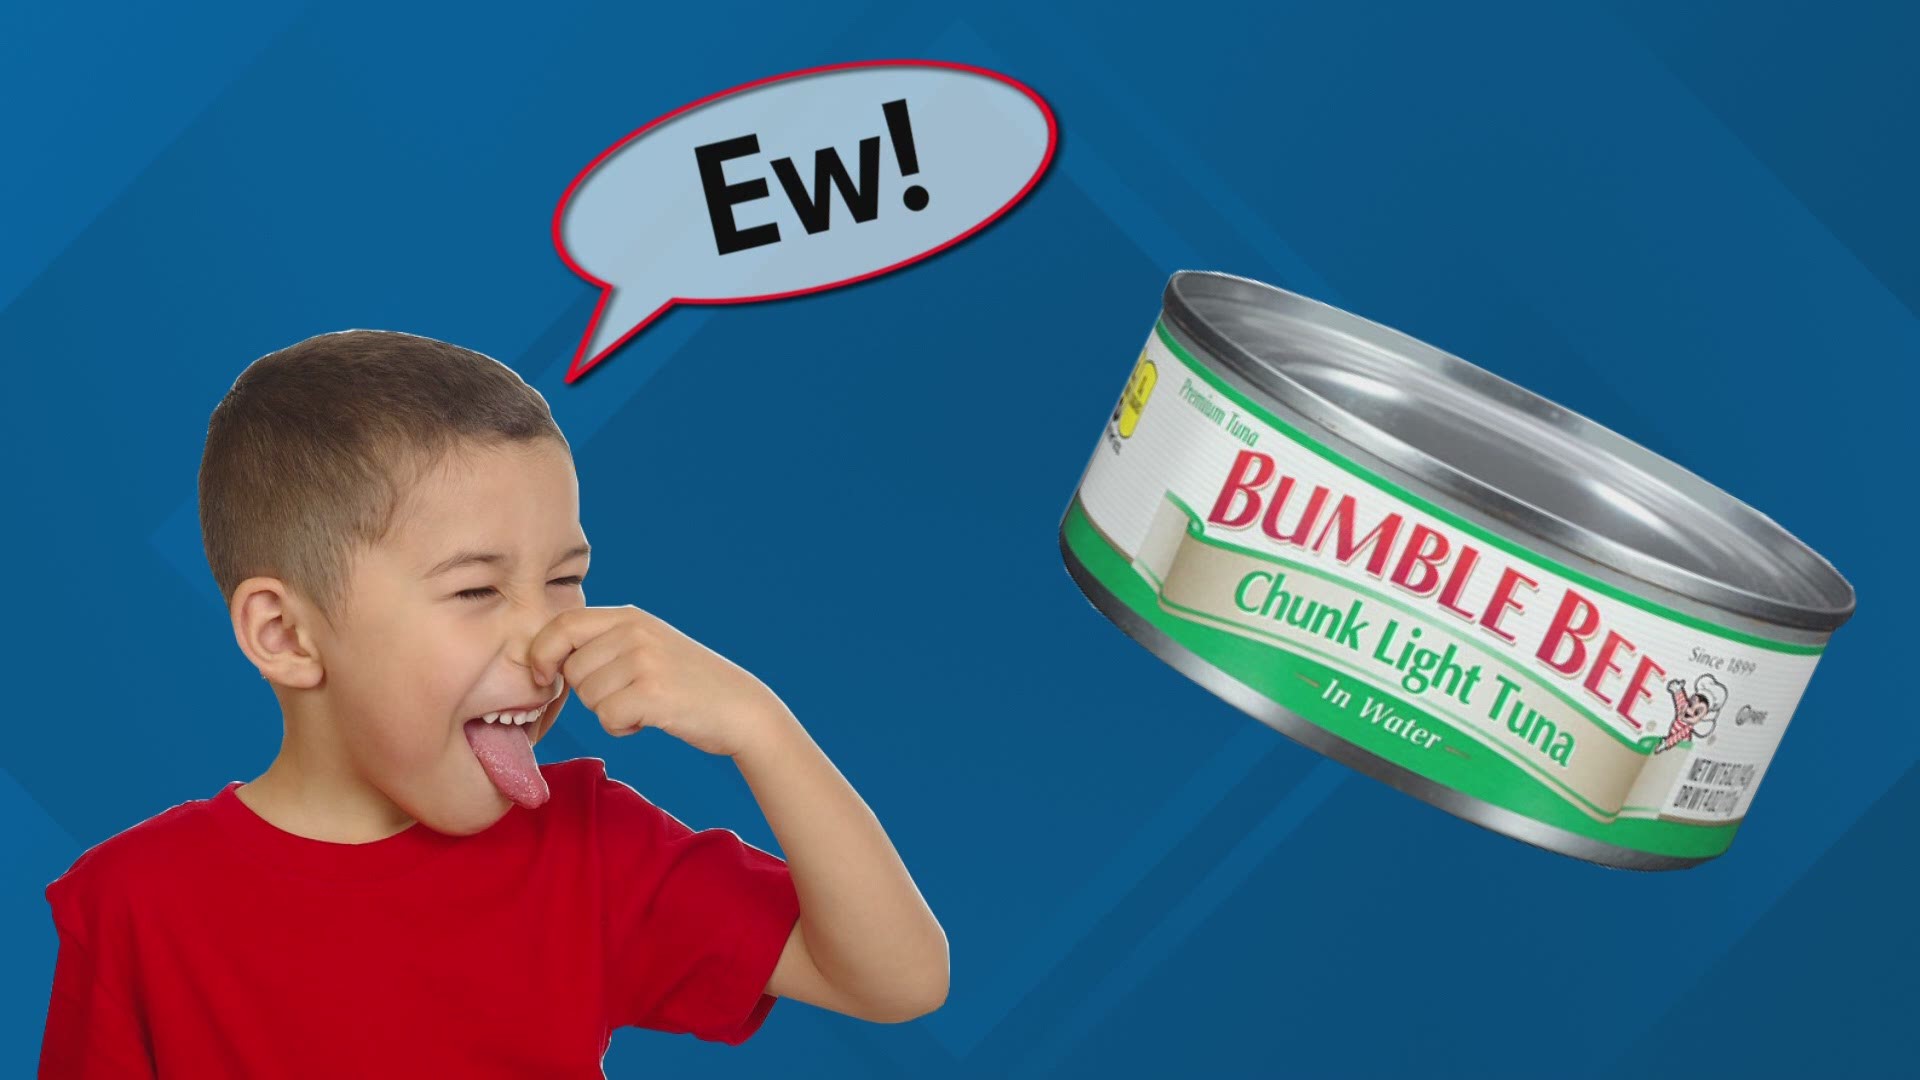 You've probably heard that we can now add canned tuna to the list of things millennials are killing, but does the fault really lie with millennials on this one?